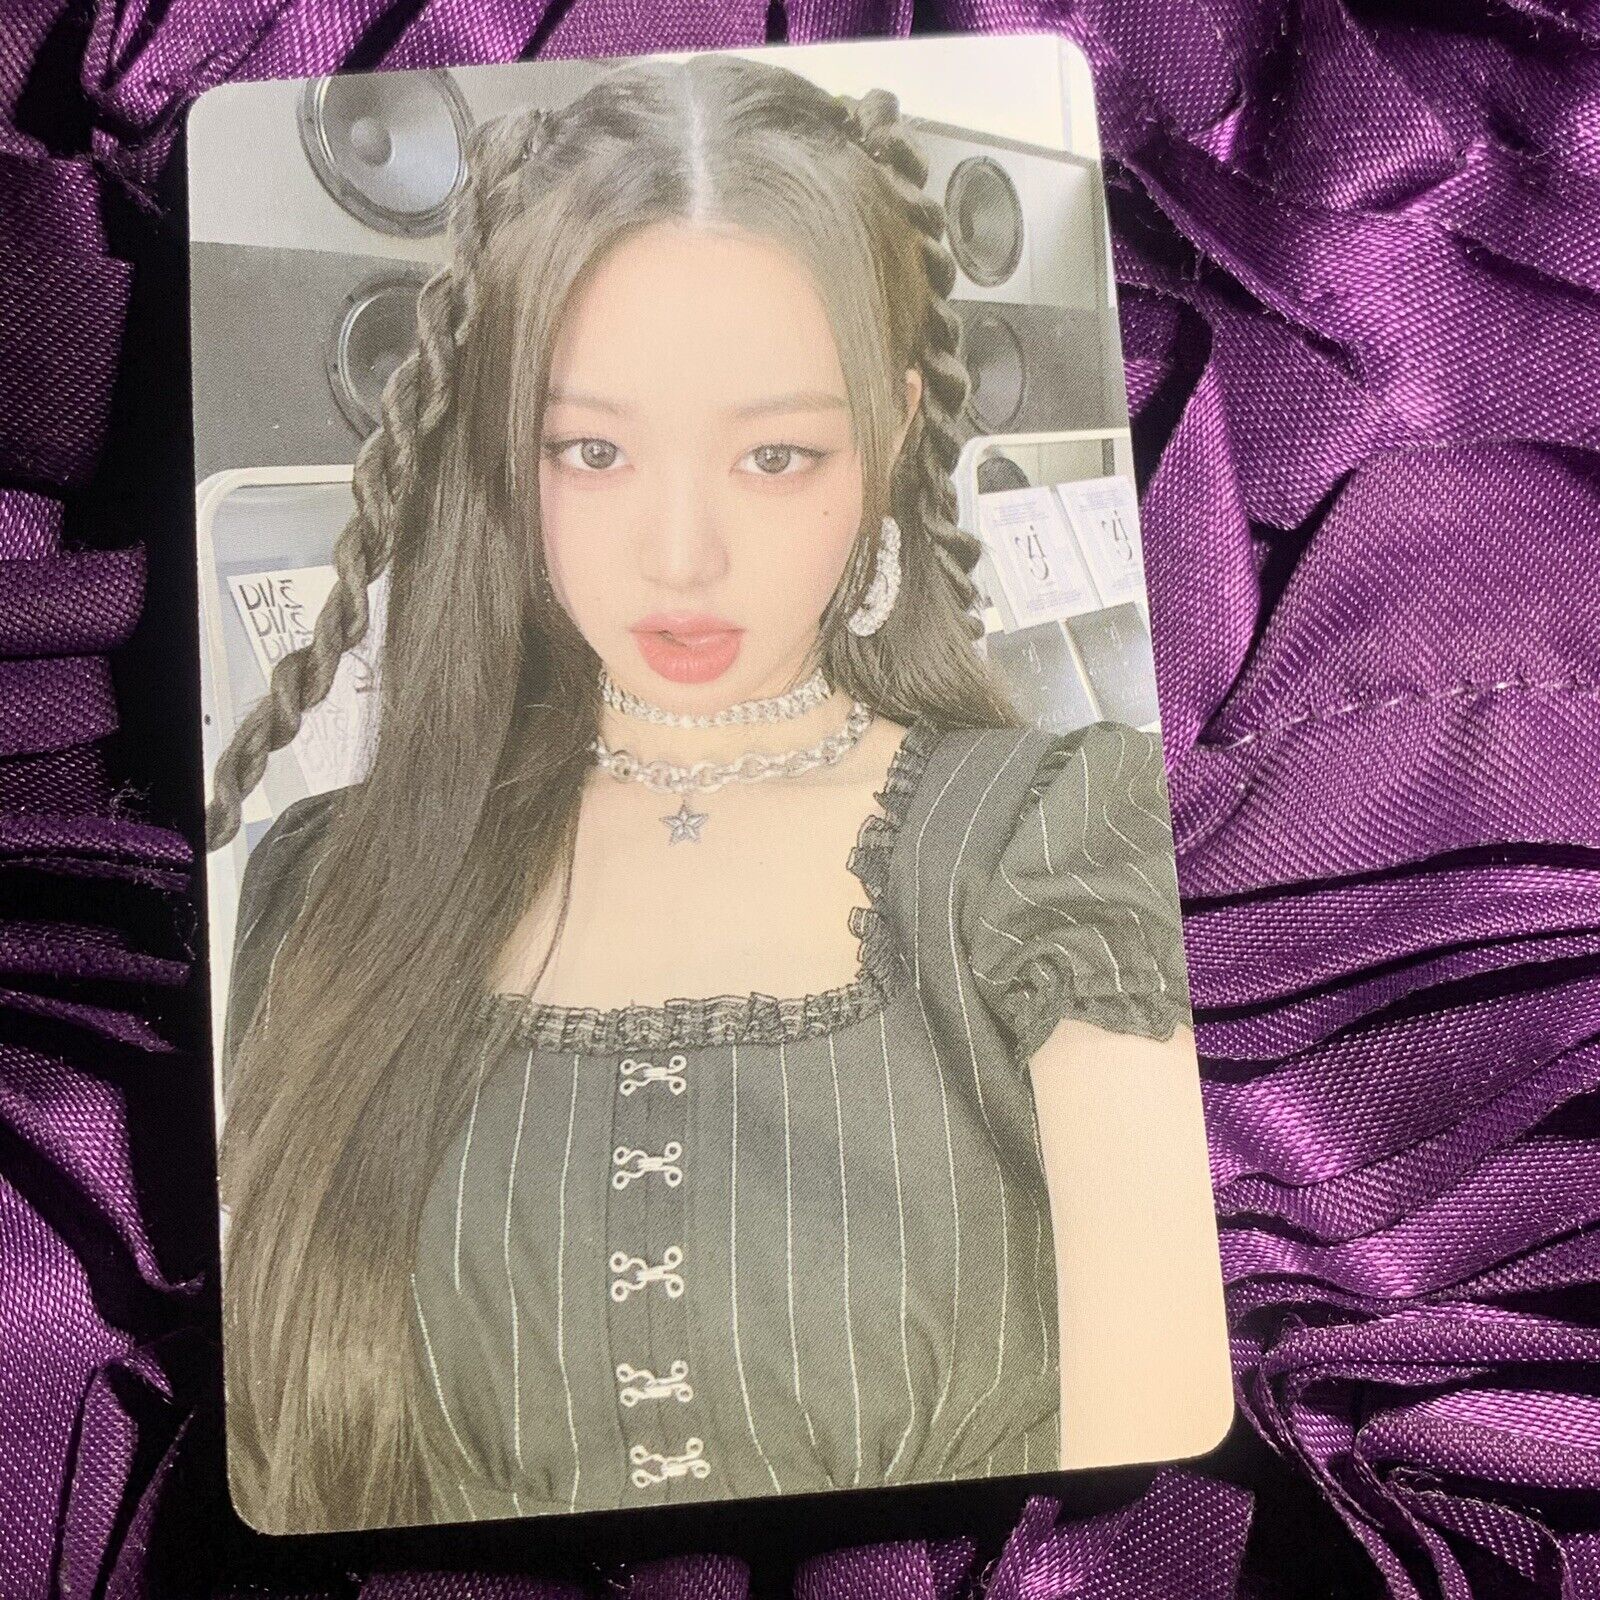 WONYOUNG IVE CANDY Edition Kpop Girl Photo Card Baddie Glam